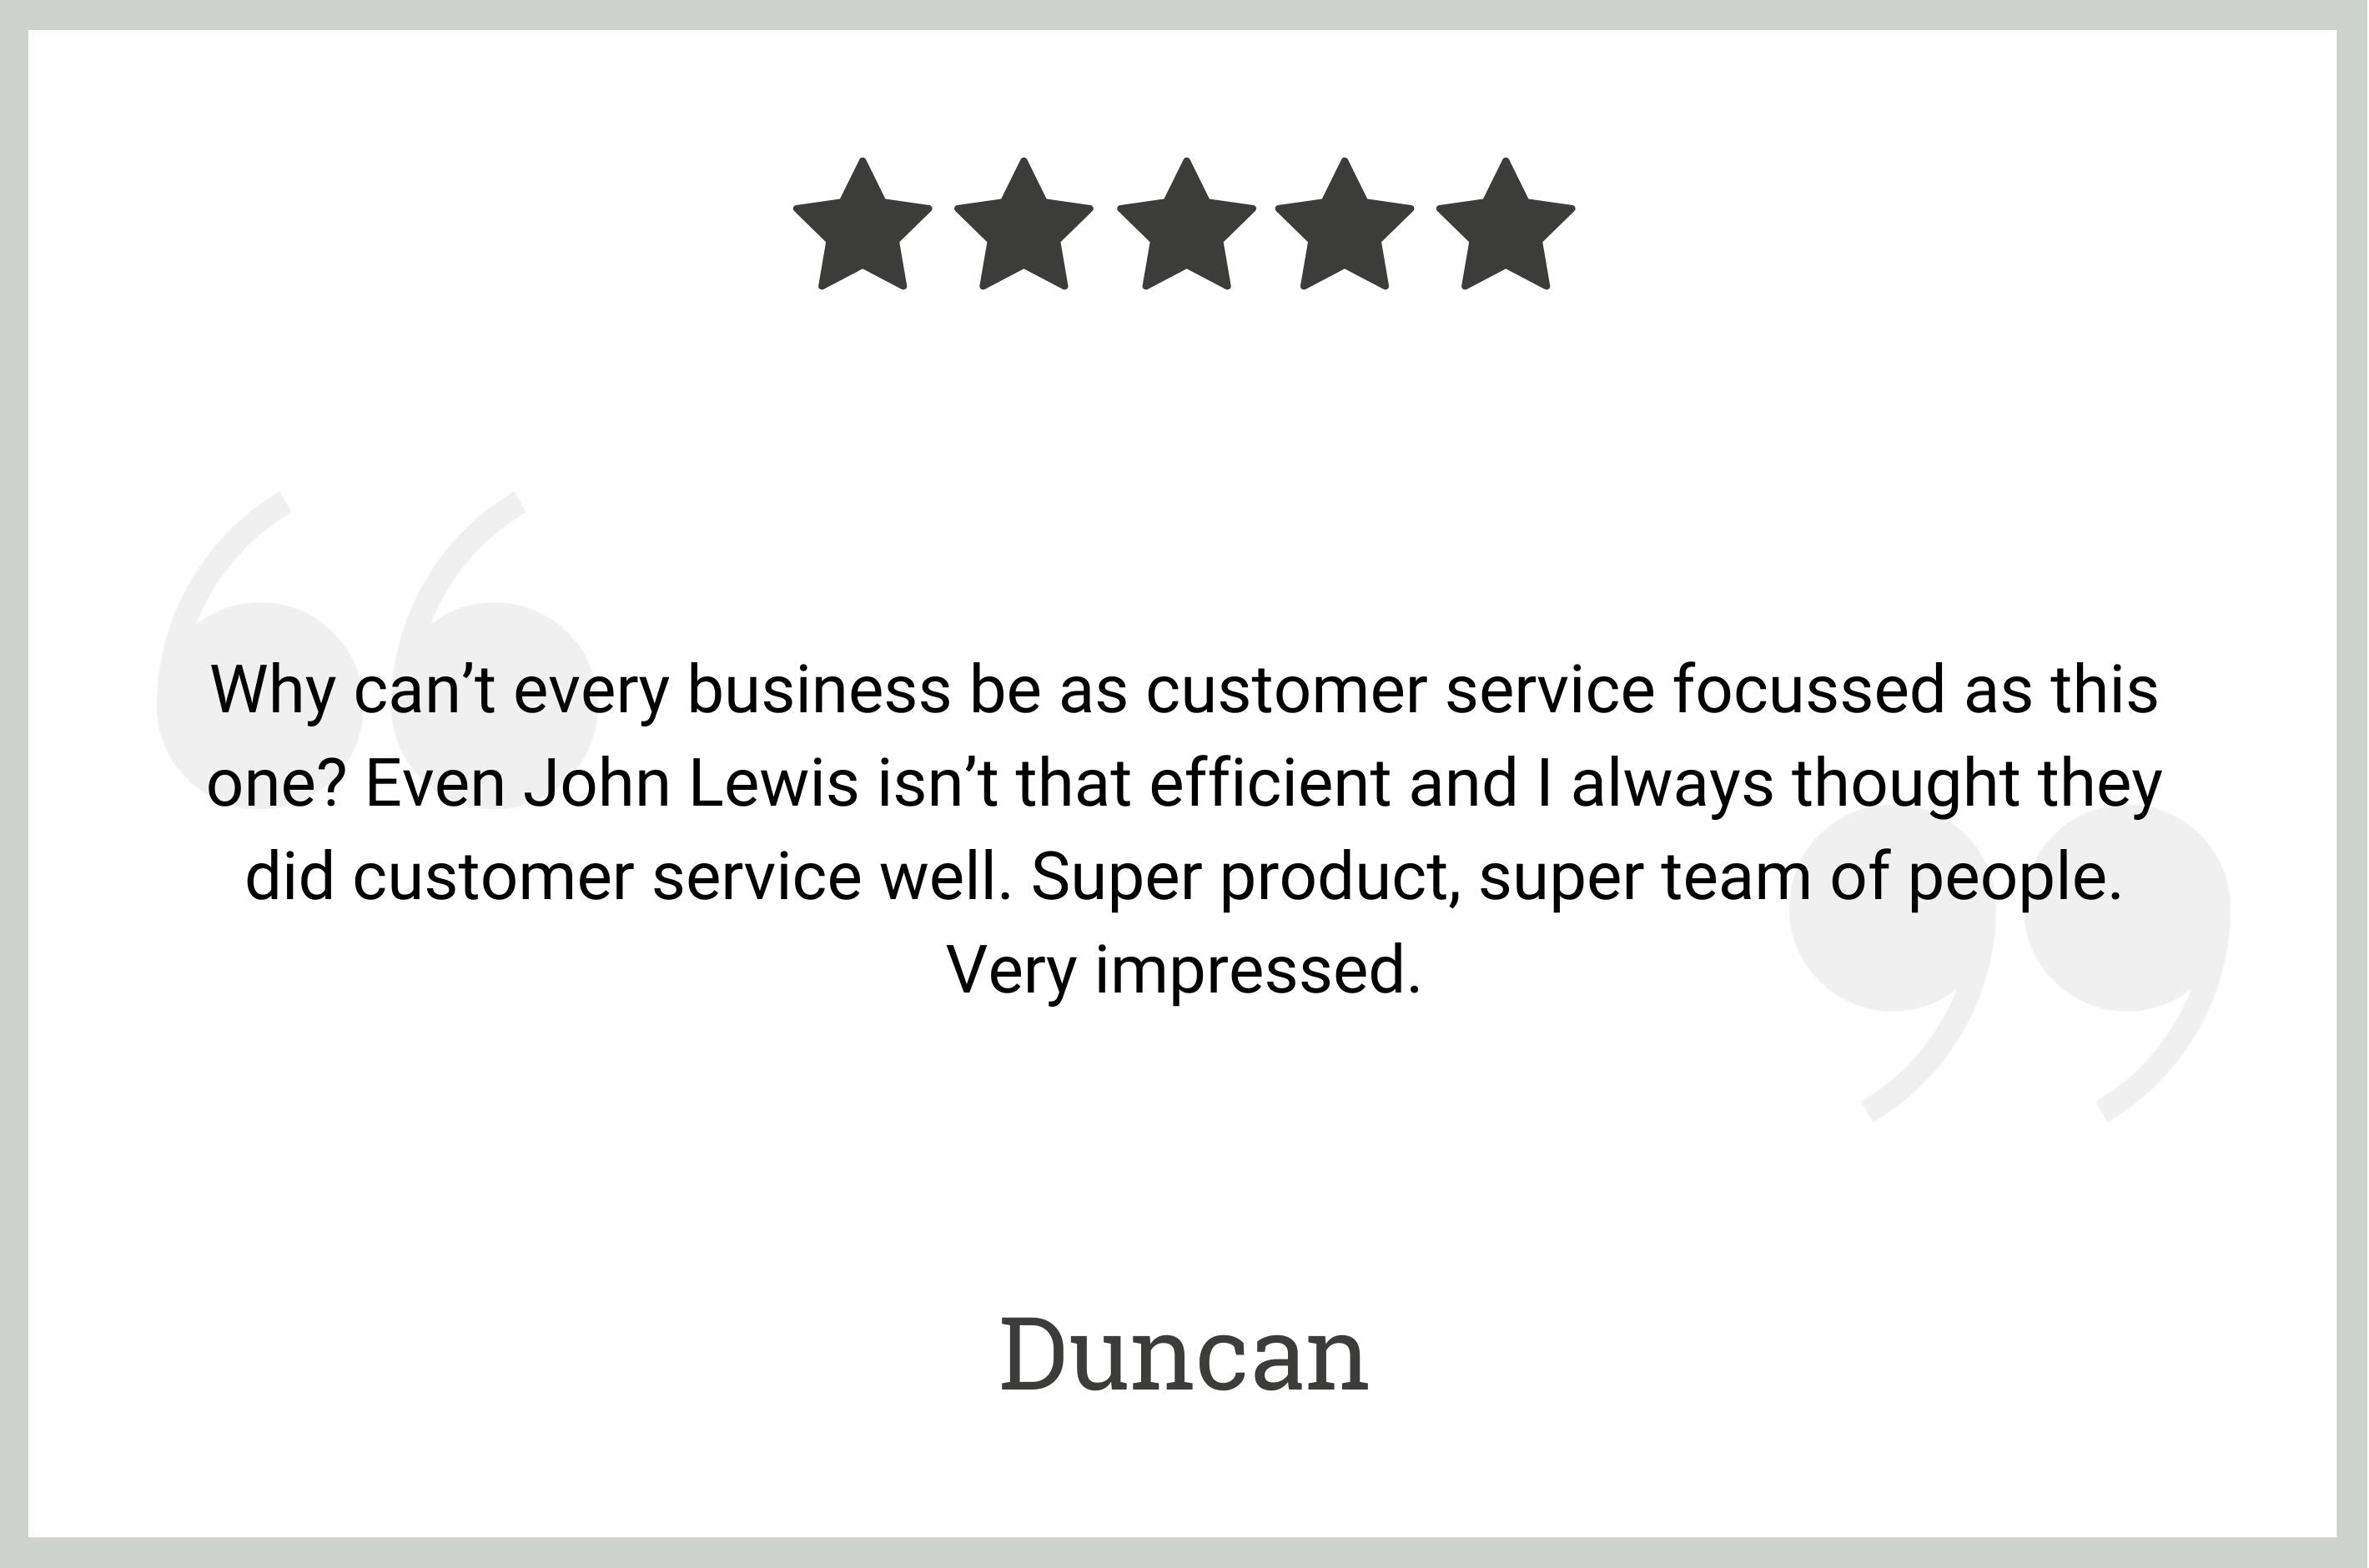 5 star review by Duncan